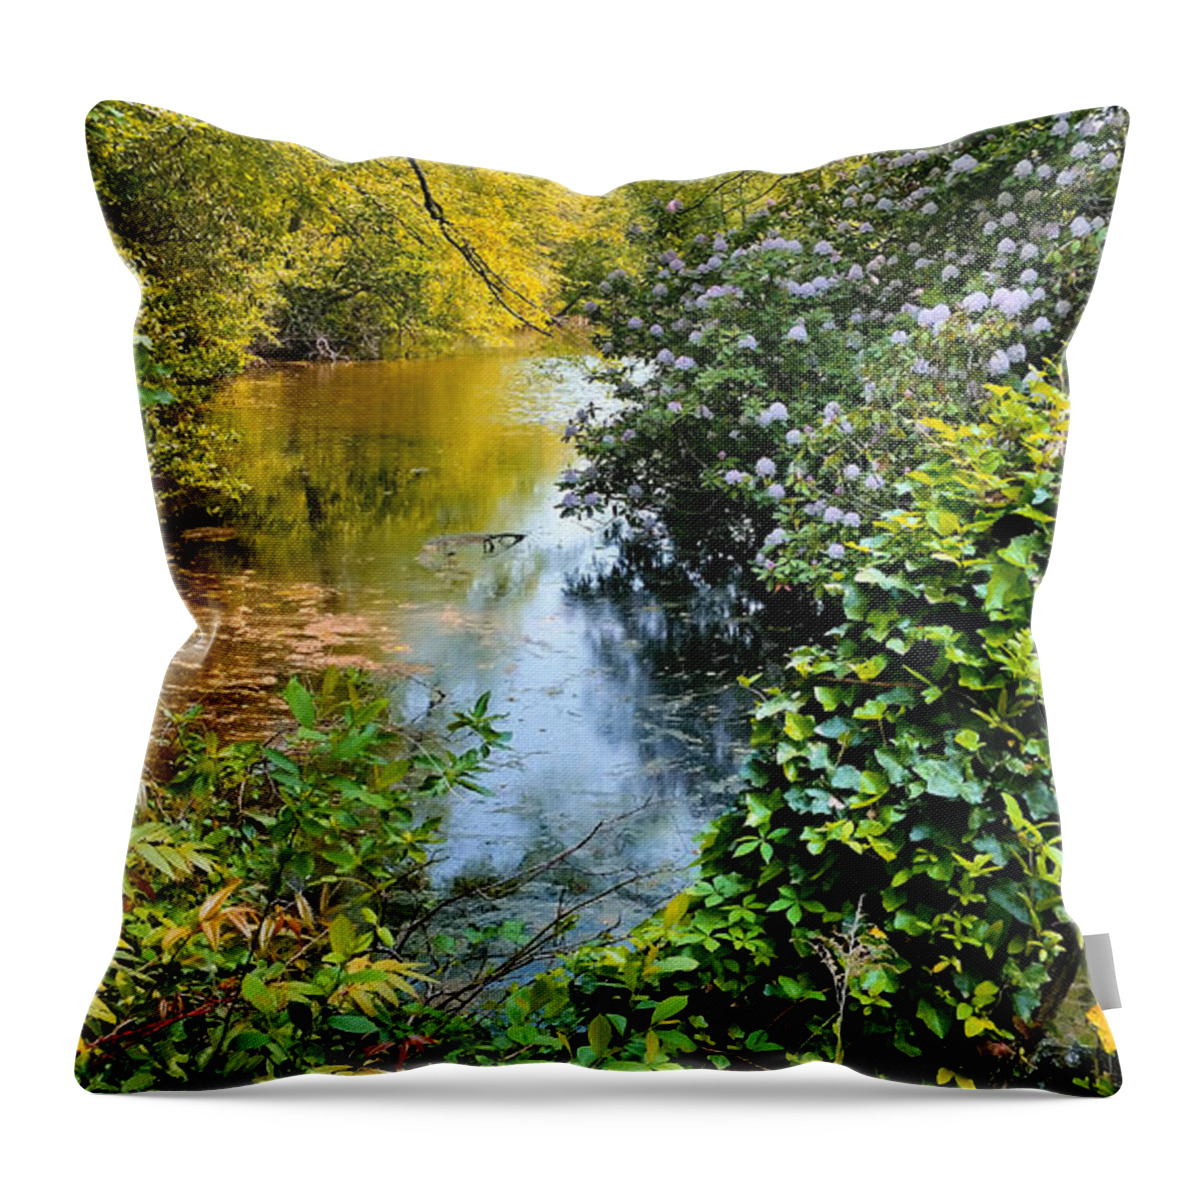 Rhododendrons Throw Pillow featuring the photograph Park River Rhododendrons by Stacie Siemsen